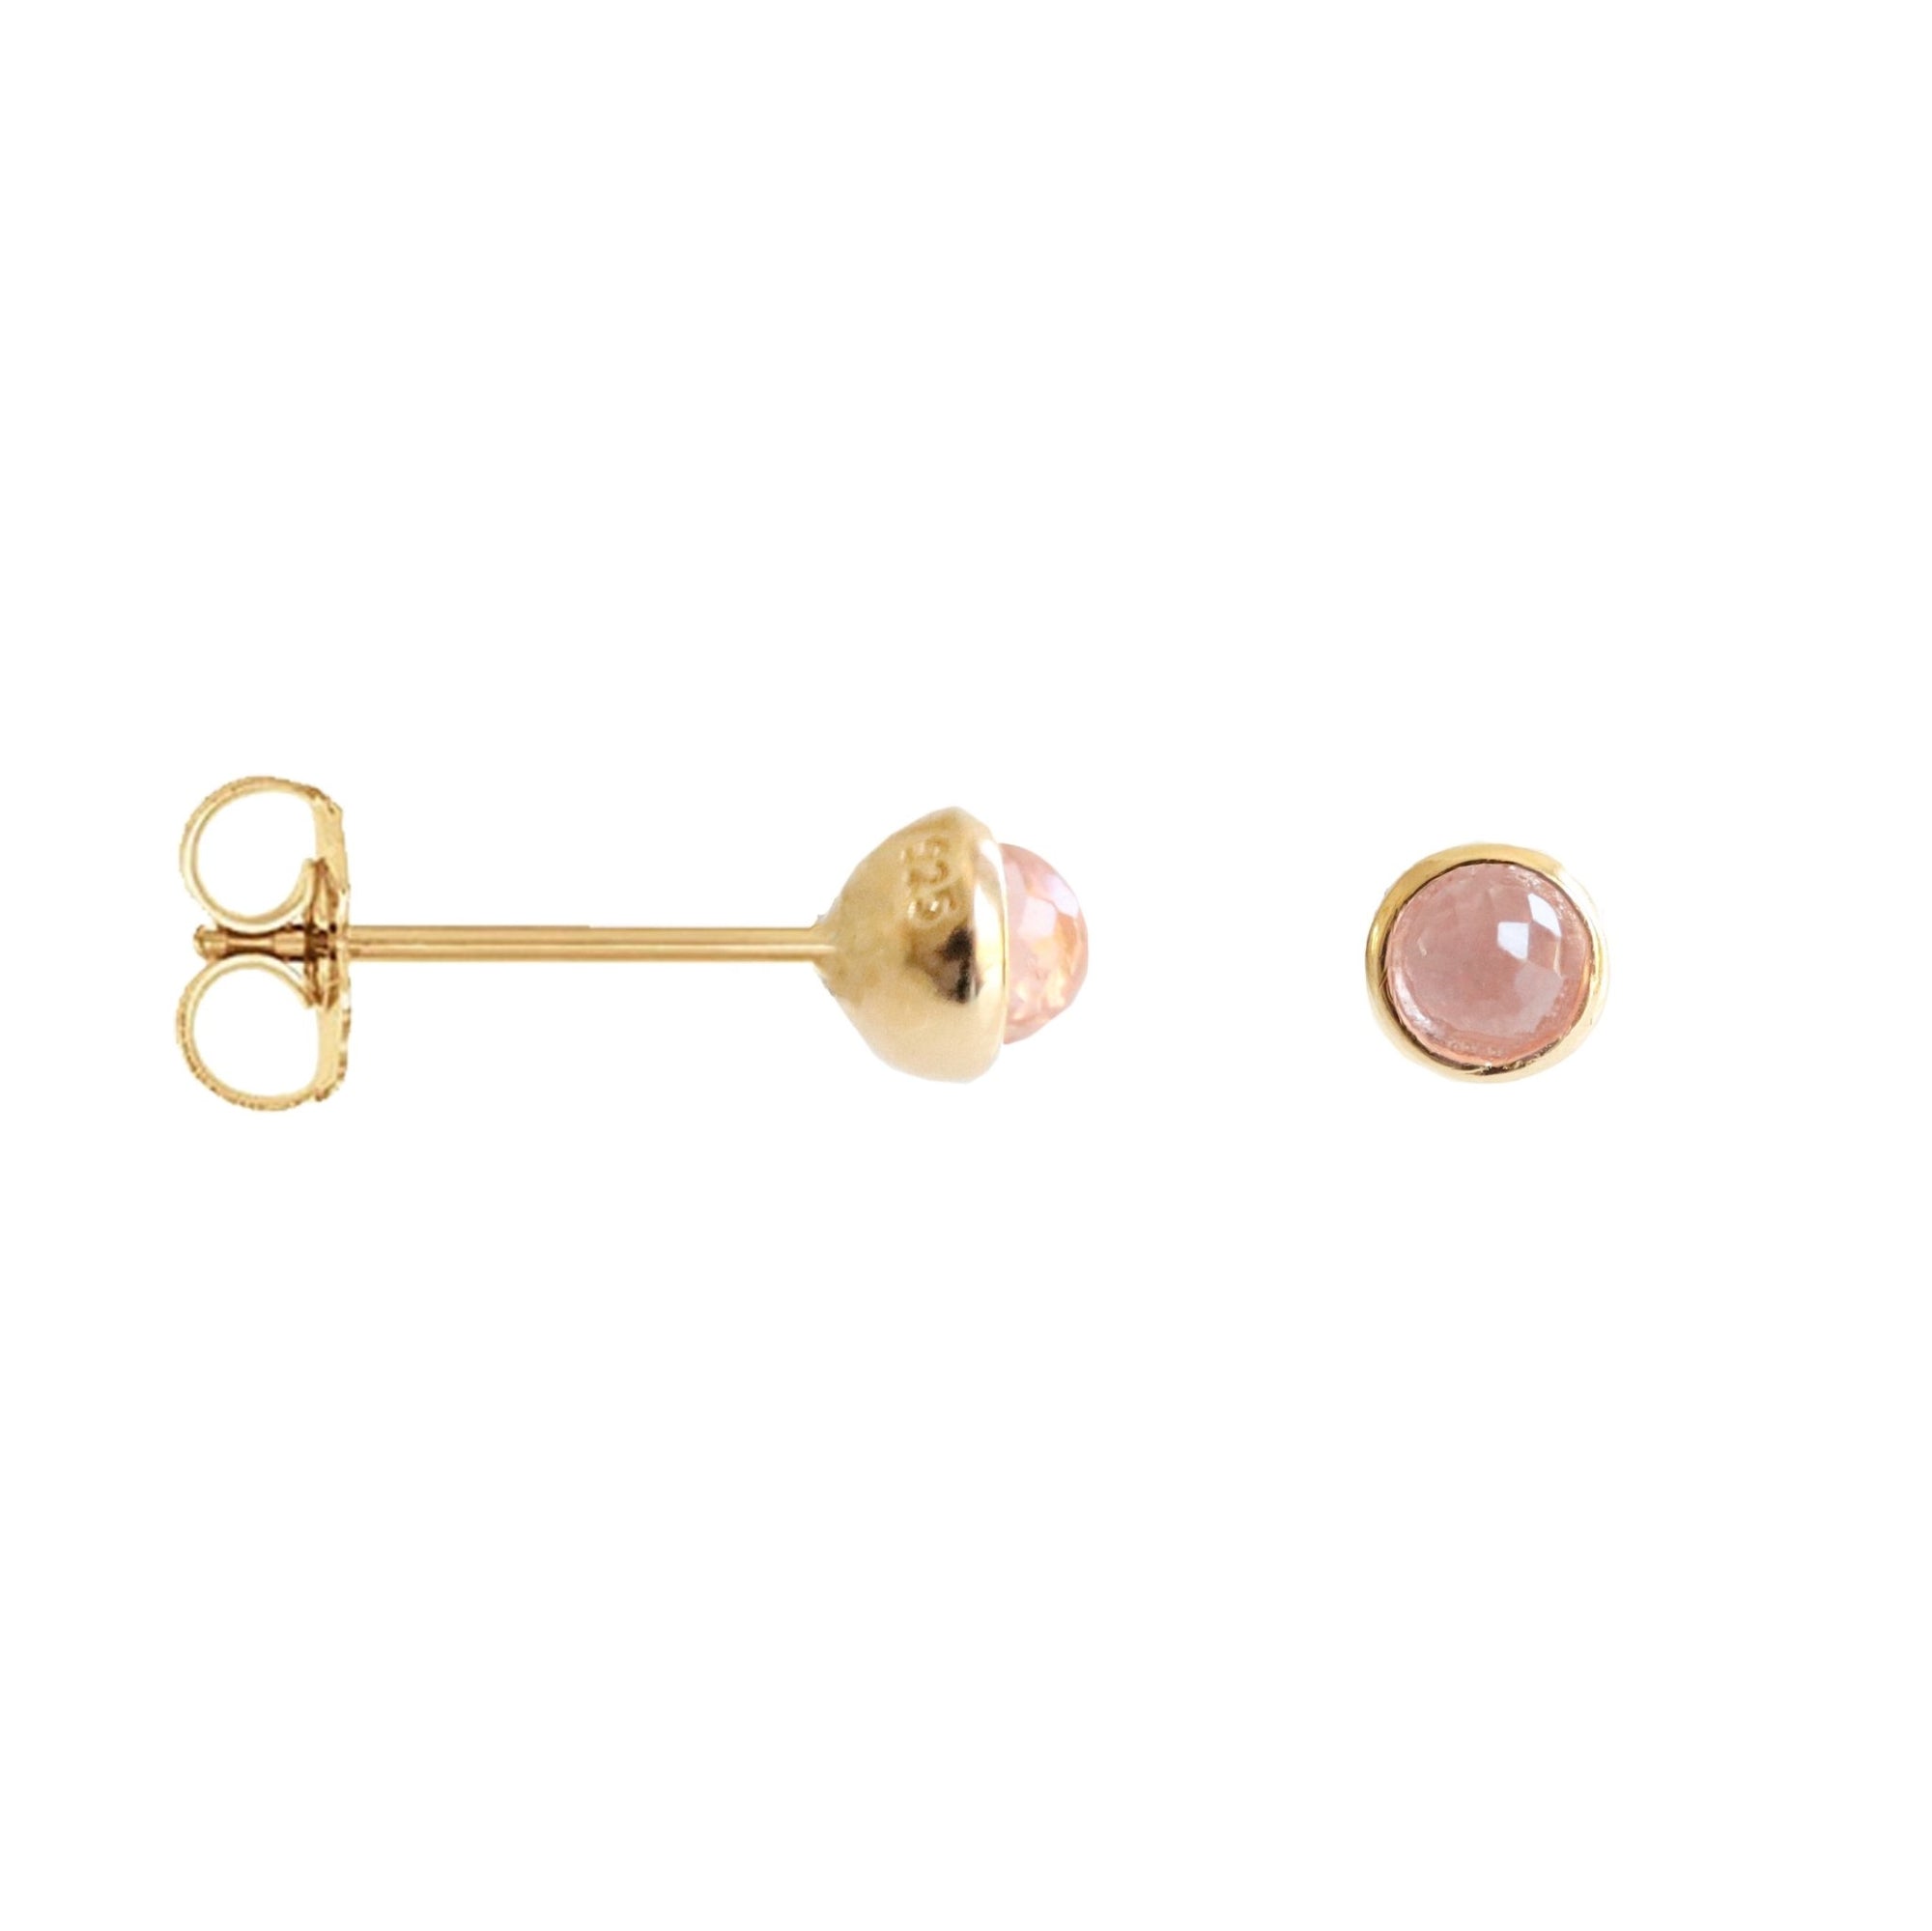 TINY PROTECT STUD EARRINGS - PINK QUARTZ & GOLD - SO PRETTY CARA COTTER